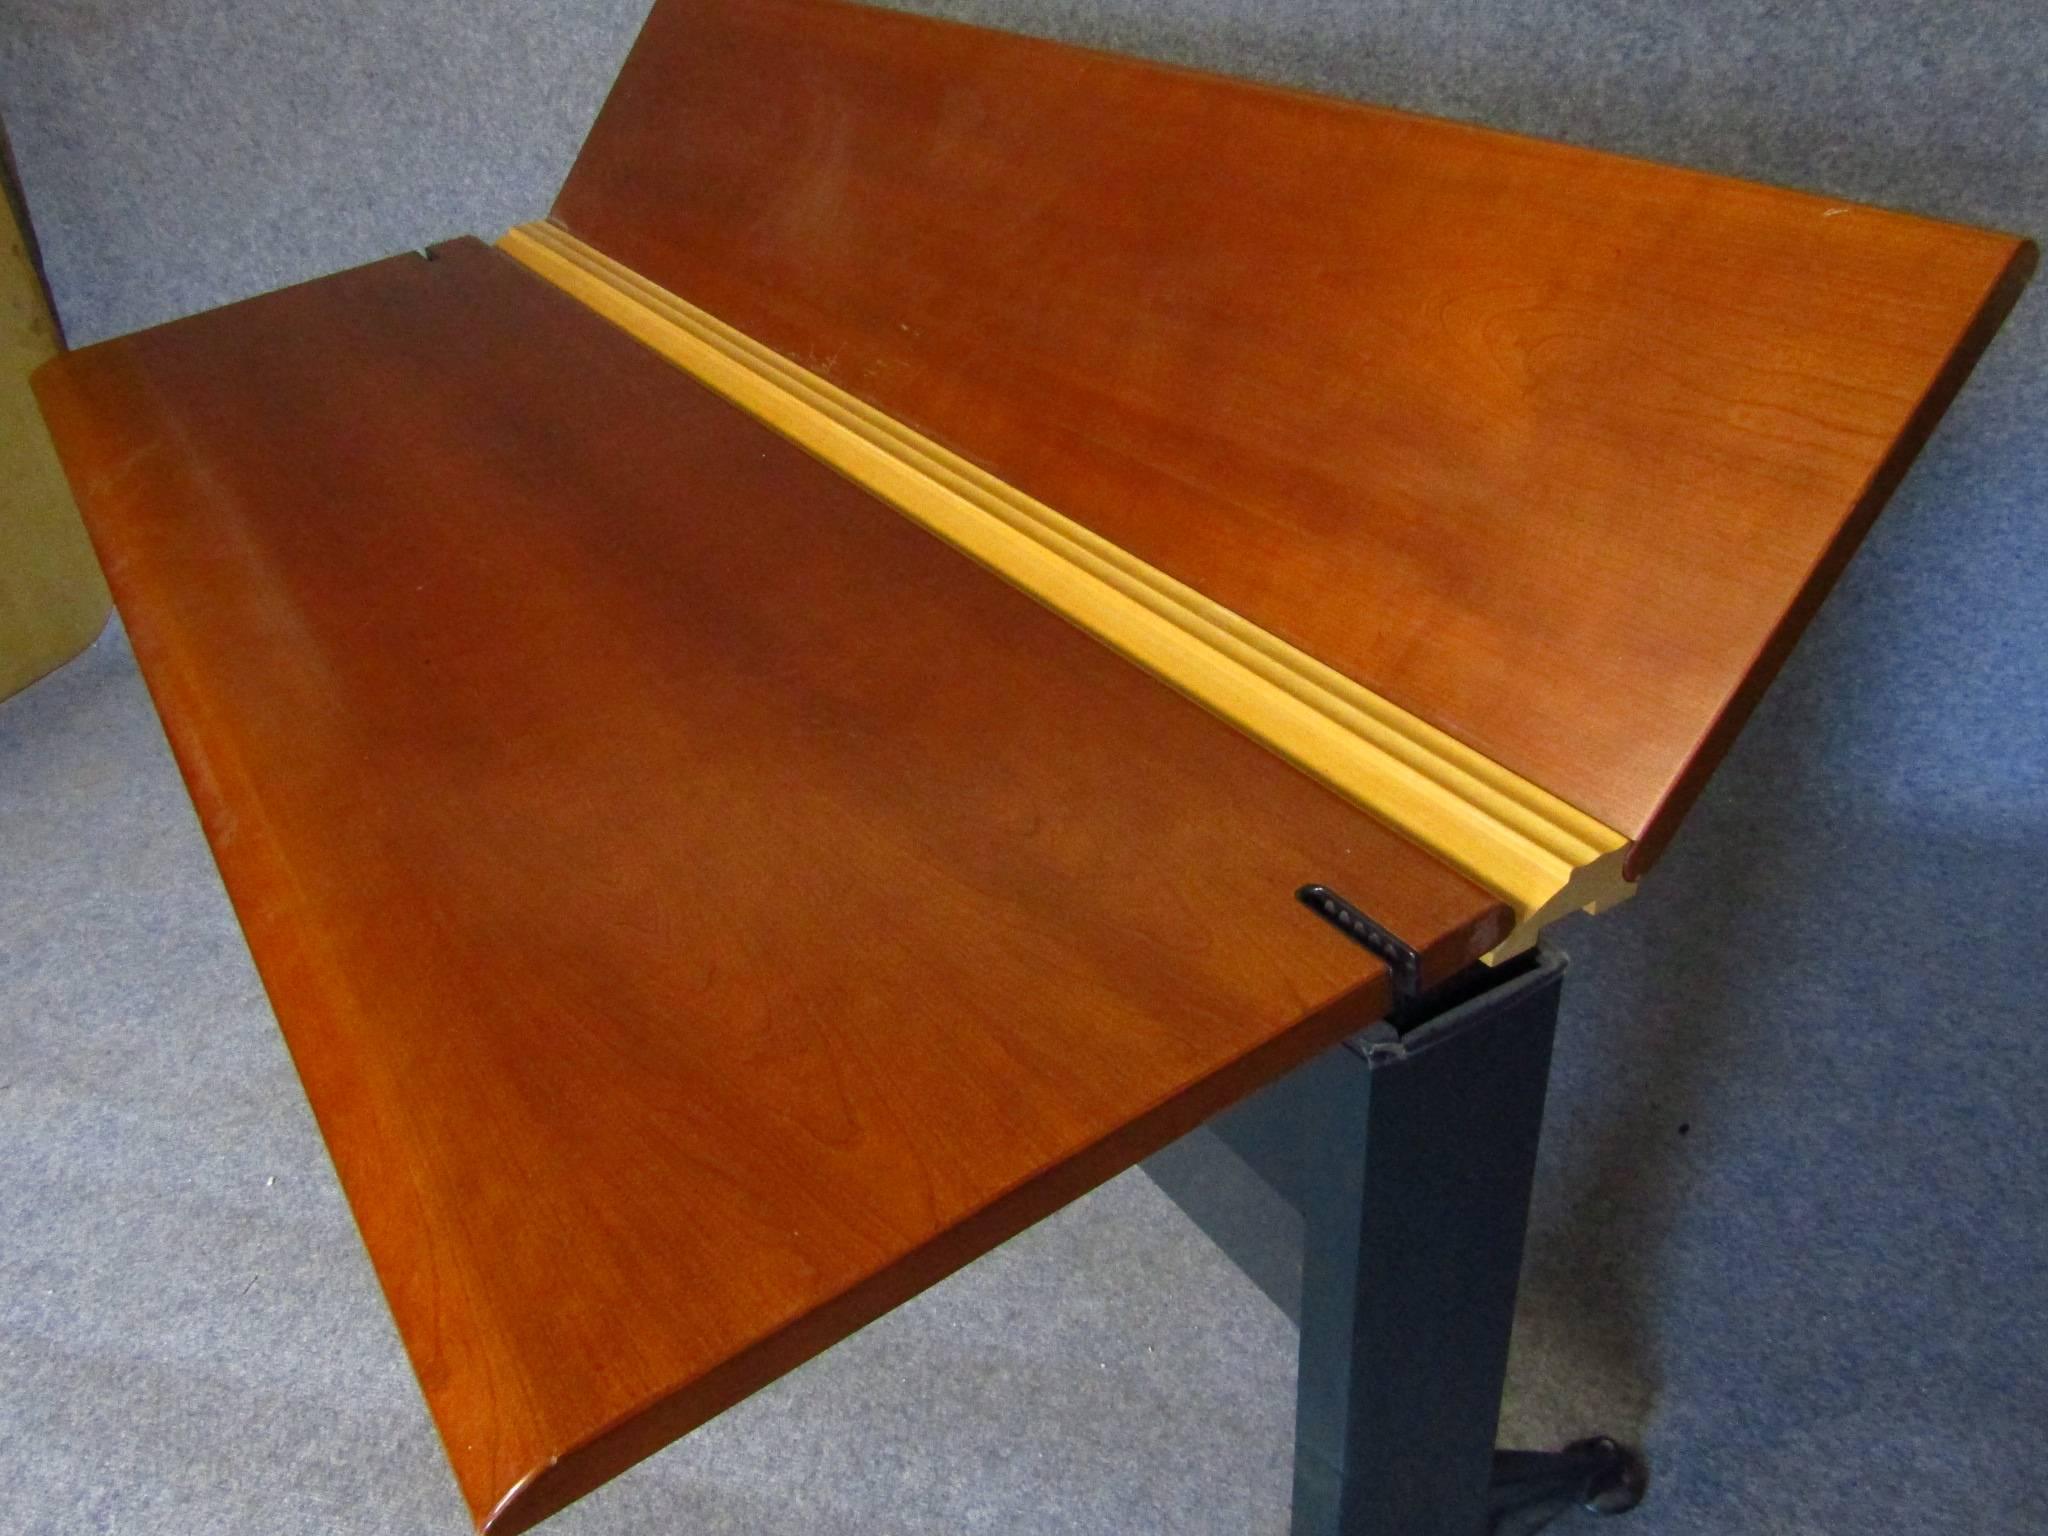 Adjustable desk by Geoff Hollington for Herman Miller (signed).

This high performance adjustable desk can function as a stand up or seated work surface. The table desk has a back surface that tilts up for display or lays flat for an enlarged work